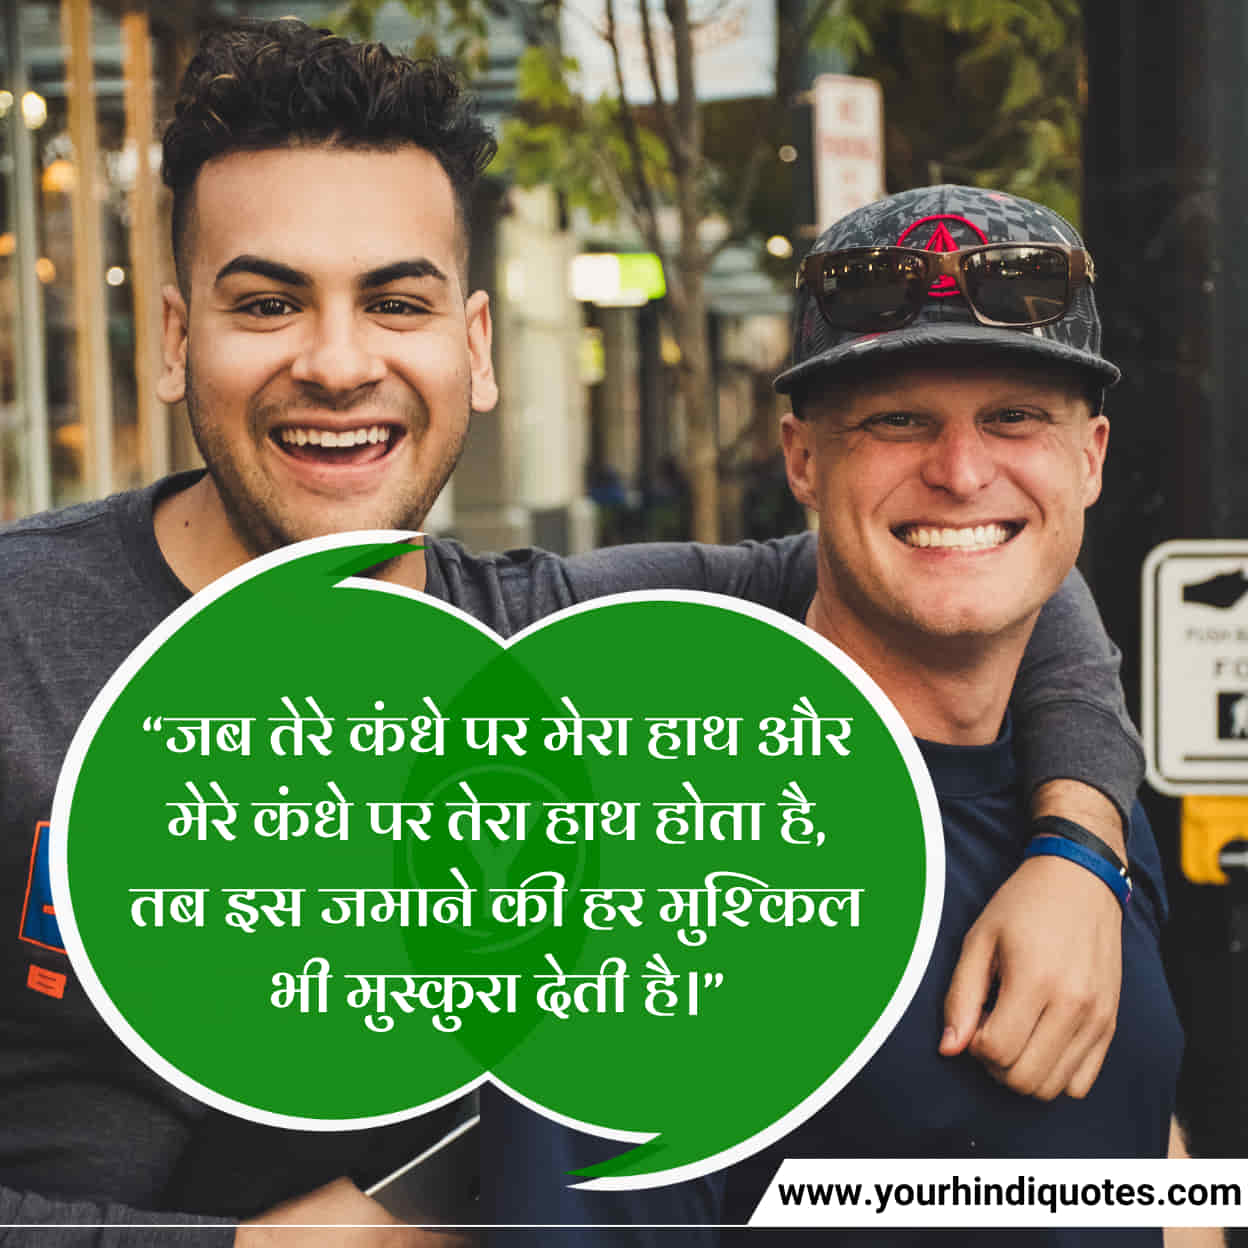 Best Quotes For Friendship Day